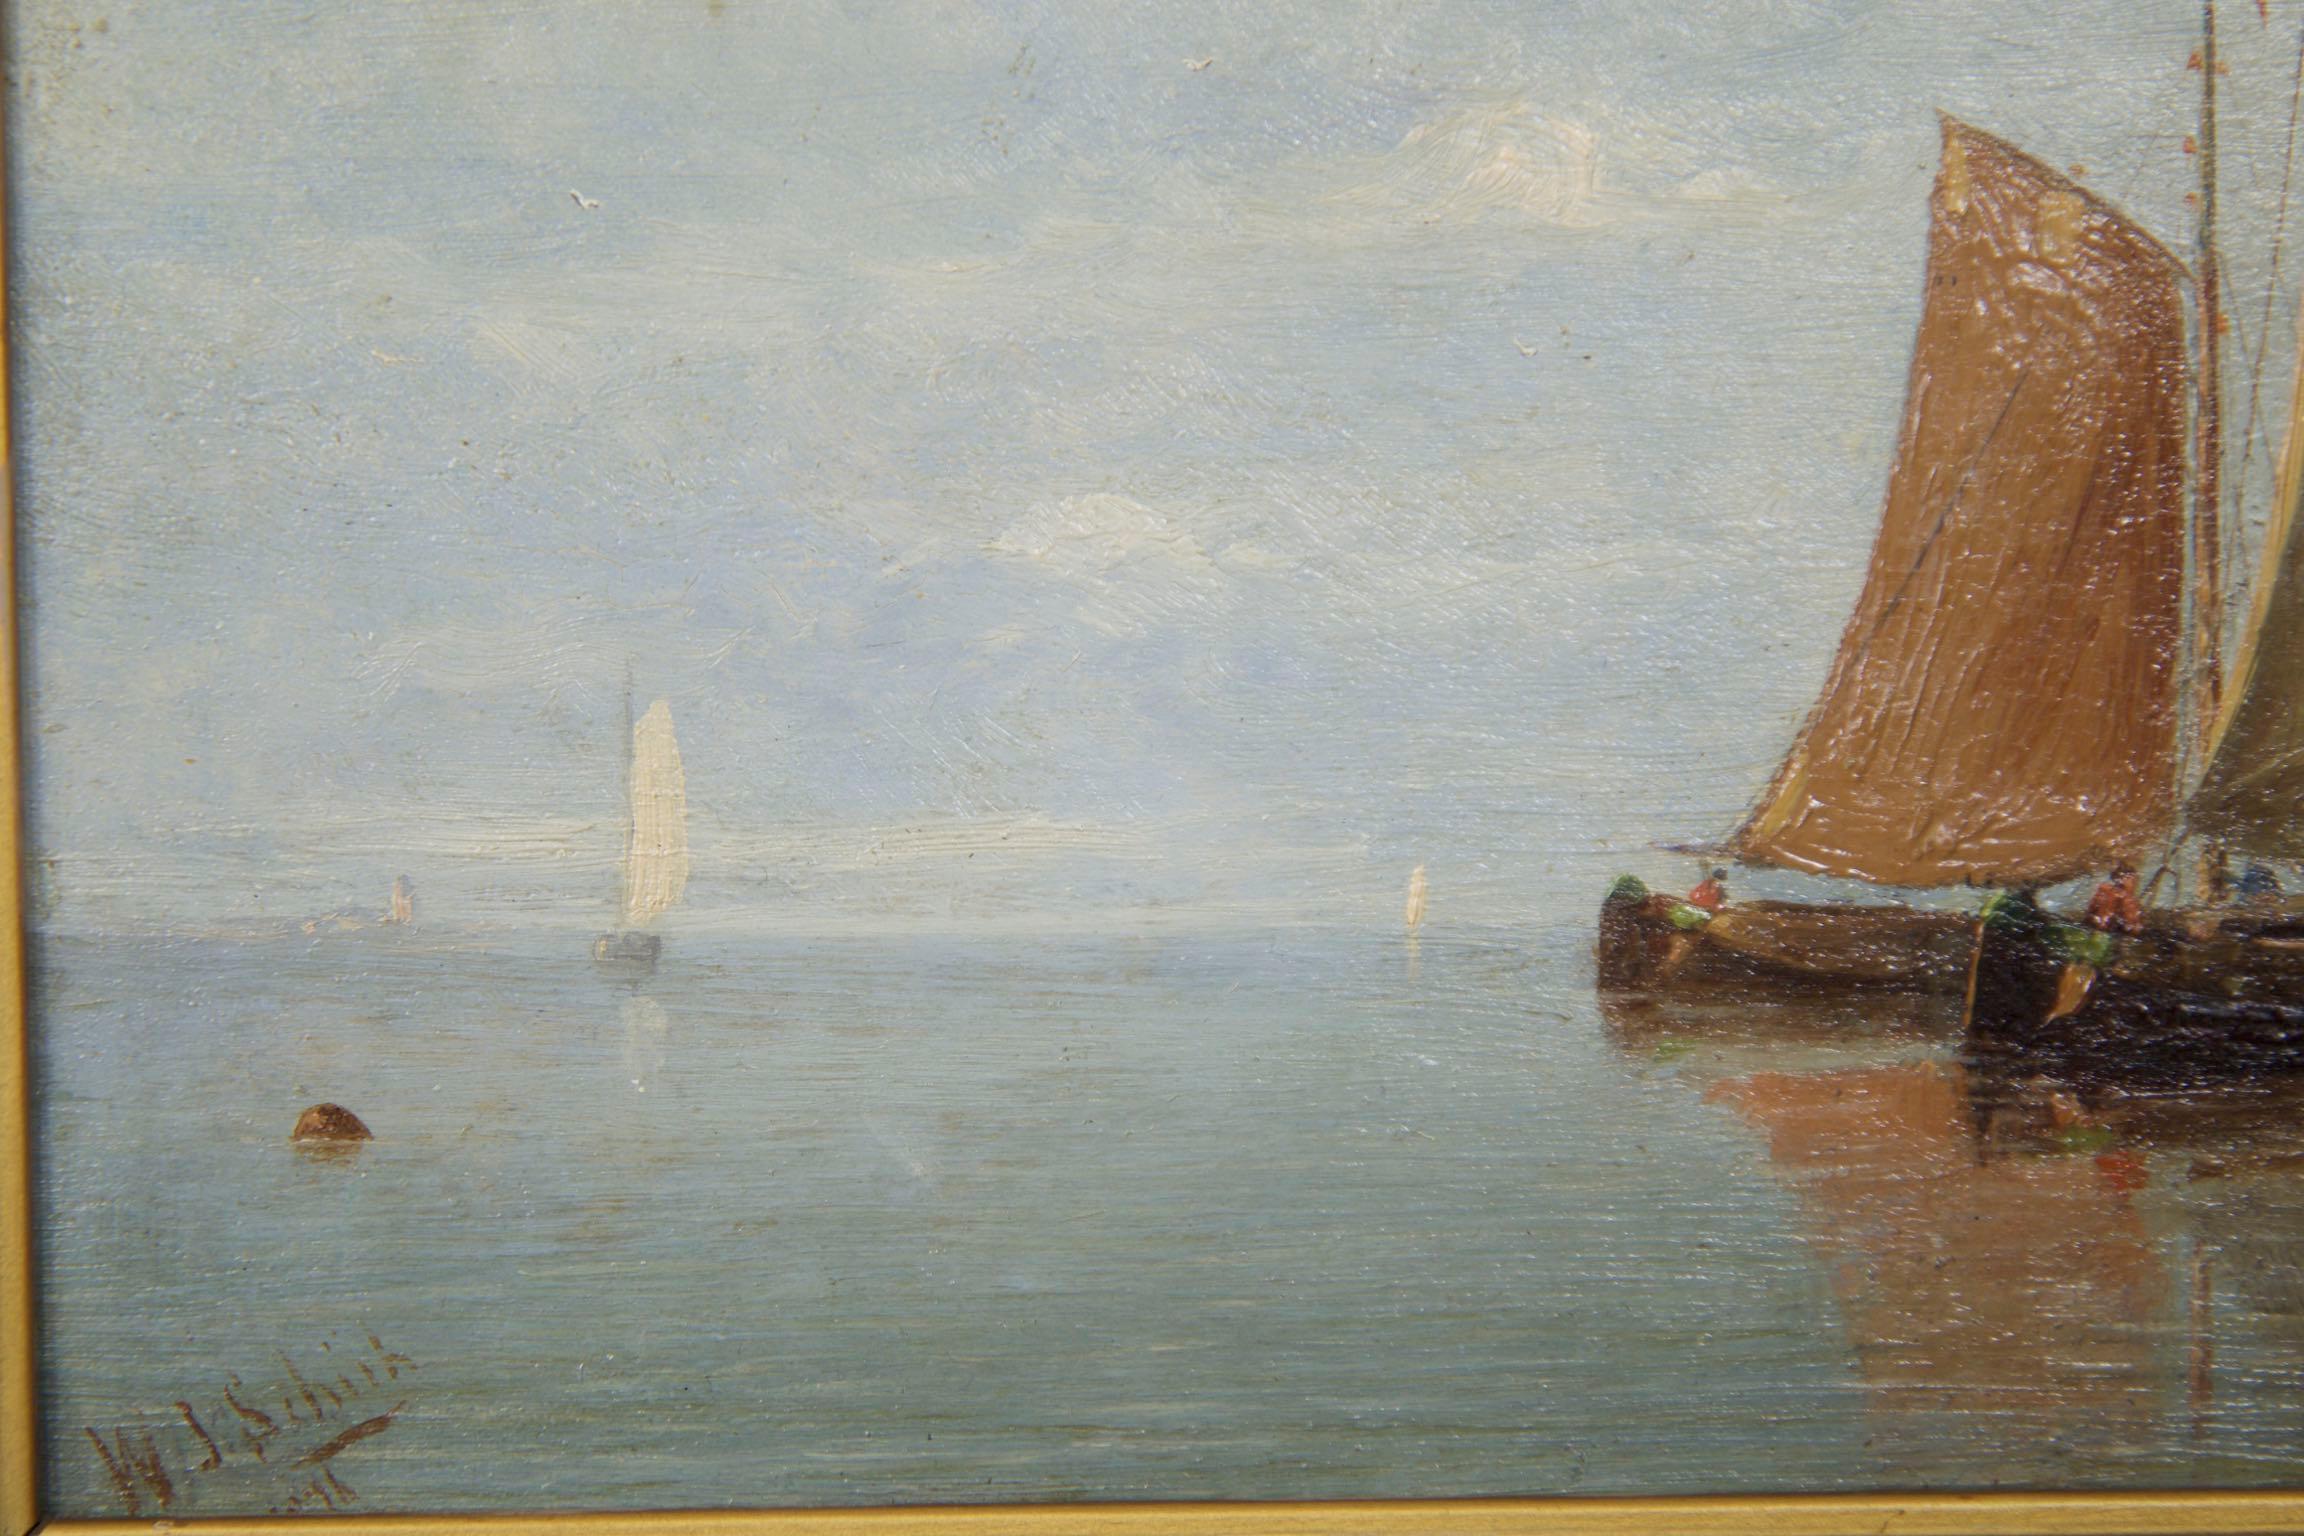 Hand-Painted Antique Oil Painting of Fishing Vessels Seascape by Willem Schütz, circa 1896